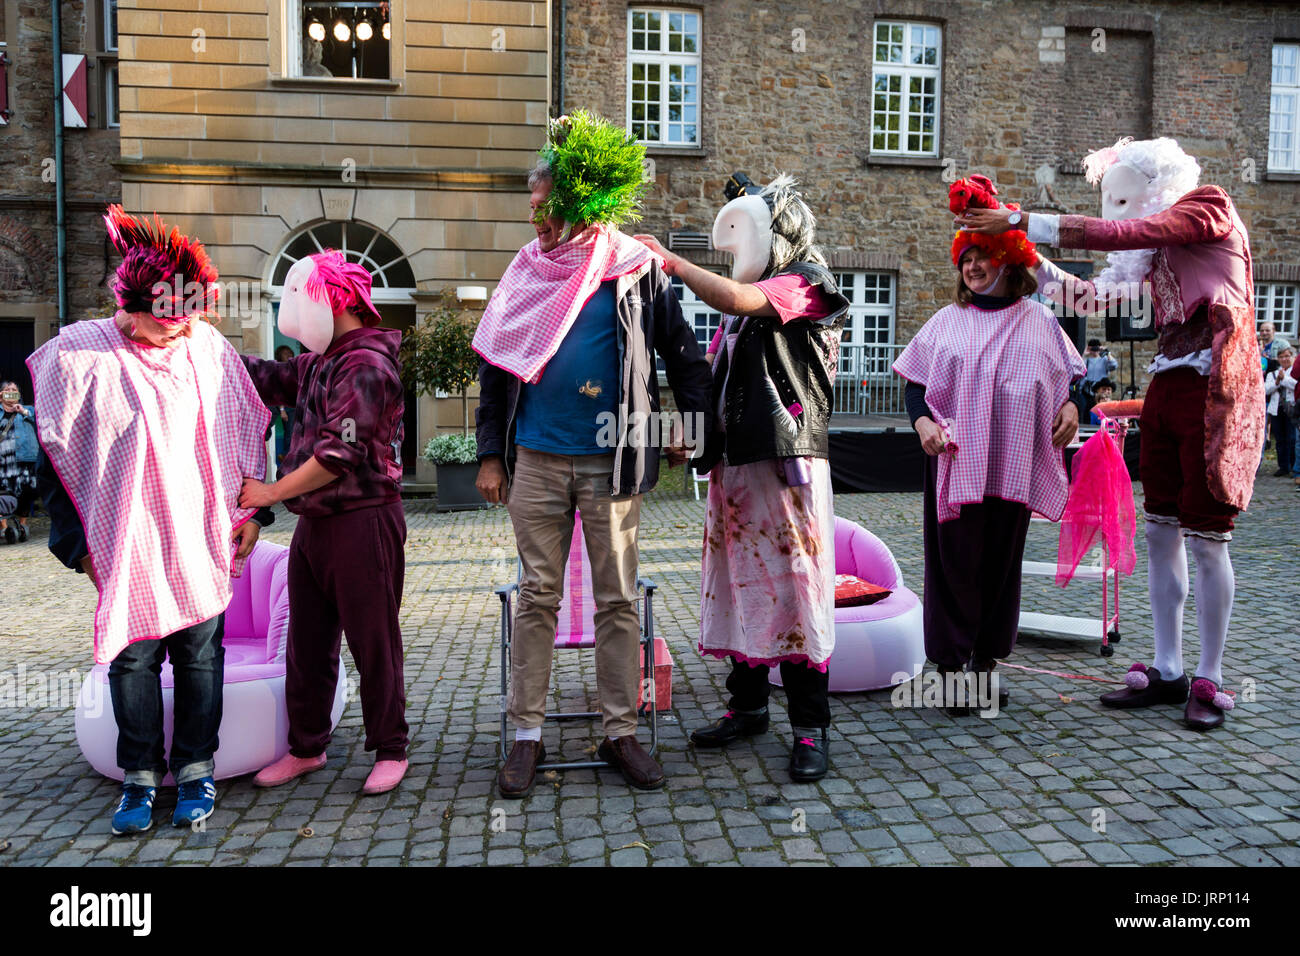 Mülheim an der Ruhr, Germany, 5 August 2017. Members of the Welsh theatre group Hijinx perform 'Pin, Curl & Dyesome' at the Broicher Schlossnacht festival at Schloss Broich castle in Mülheim/Ruhr, Germany. The show with performers from Prestatyn/Wales is set in a quirky and ficticious hair saloon. Photo: Bettina Strenske/Alamy Live News Stock Photo